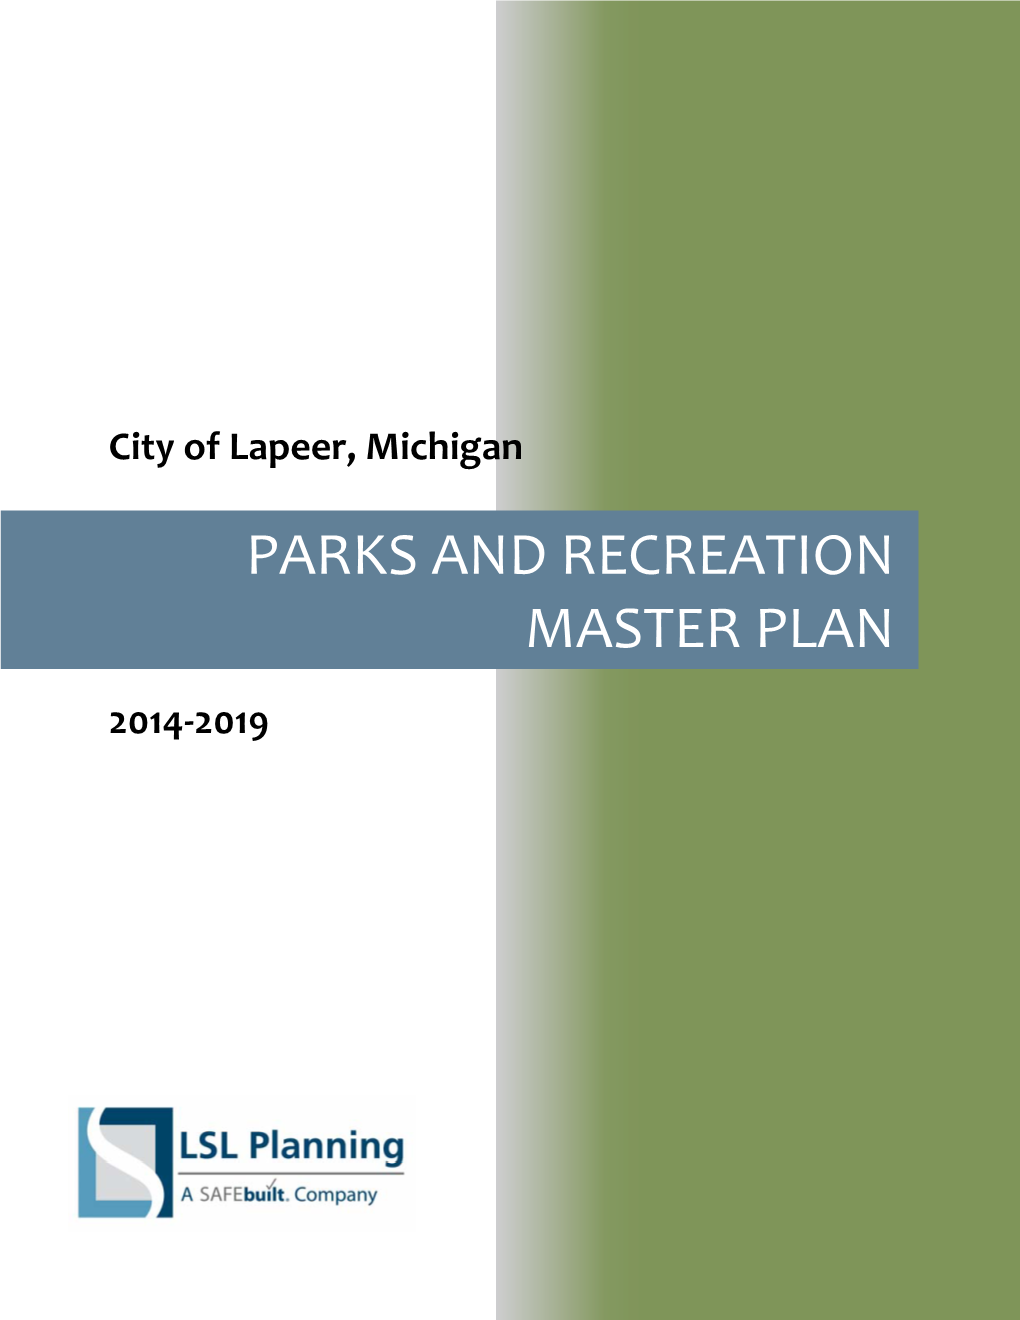 Parks and Recreation Master Plan 2014